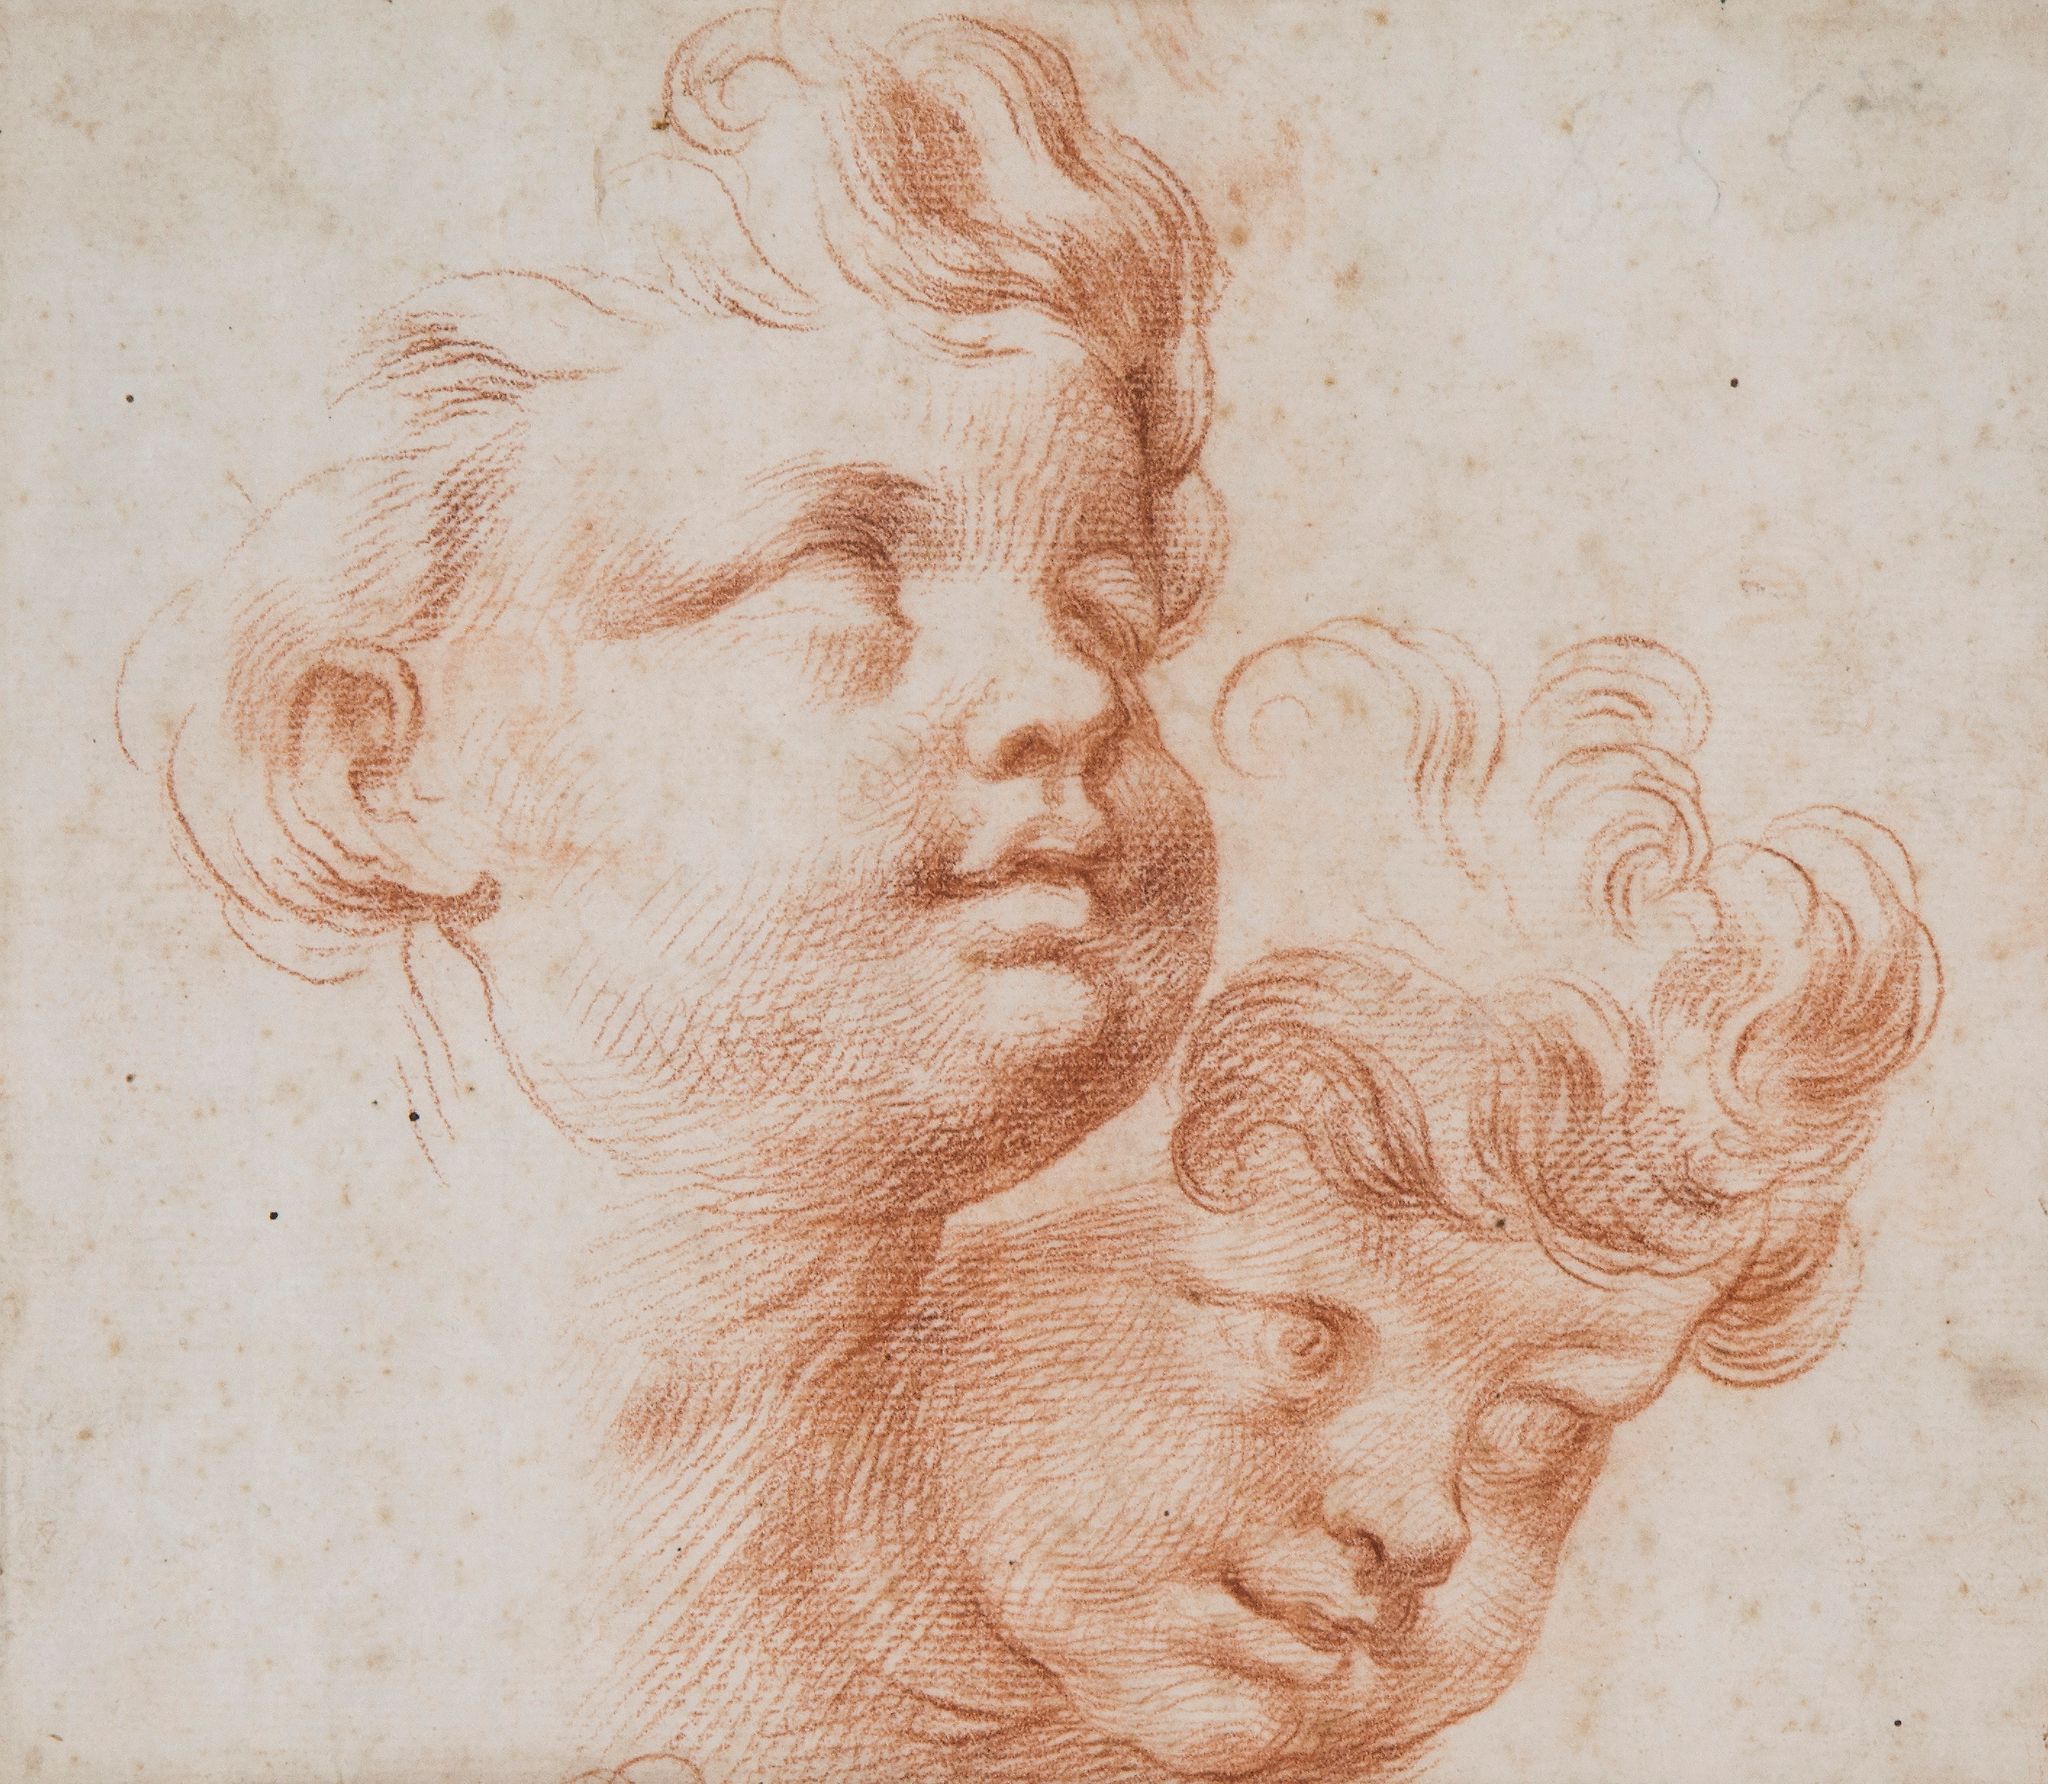 Italian School (18th Century) - Head studies of two young boys Red chalk on laid paper 18.5 x 21 cm.